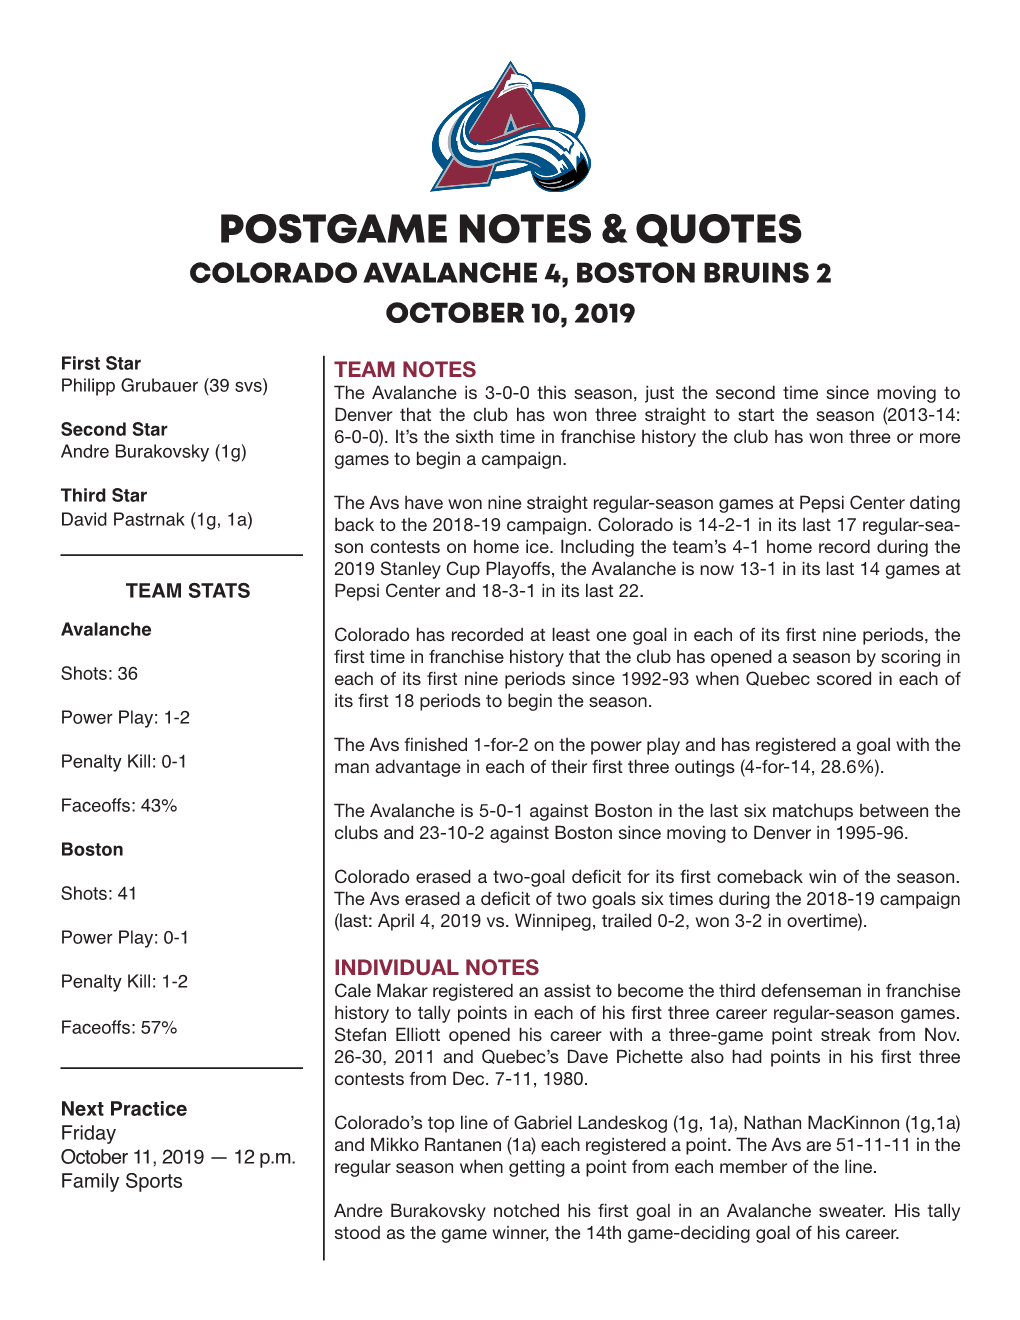 Postgame Notes & Quotes